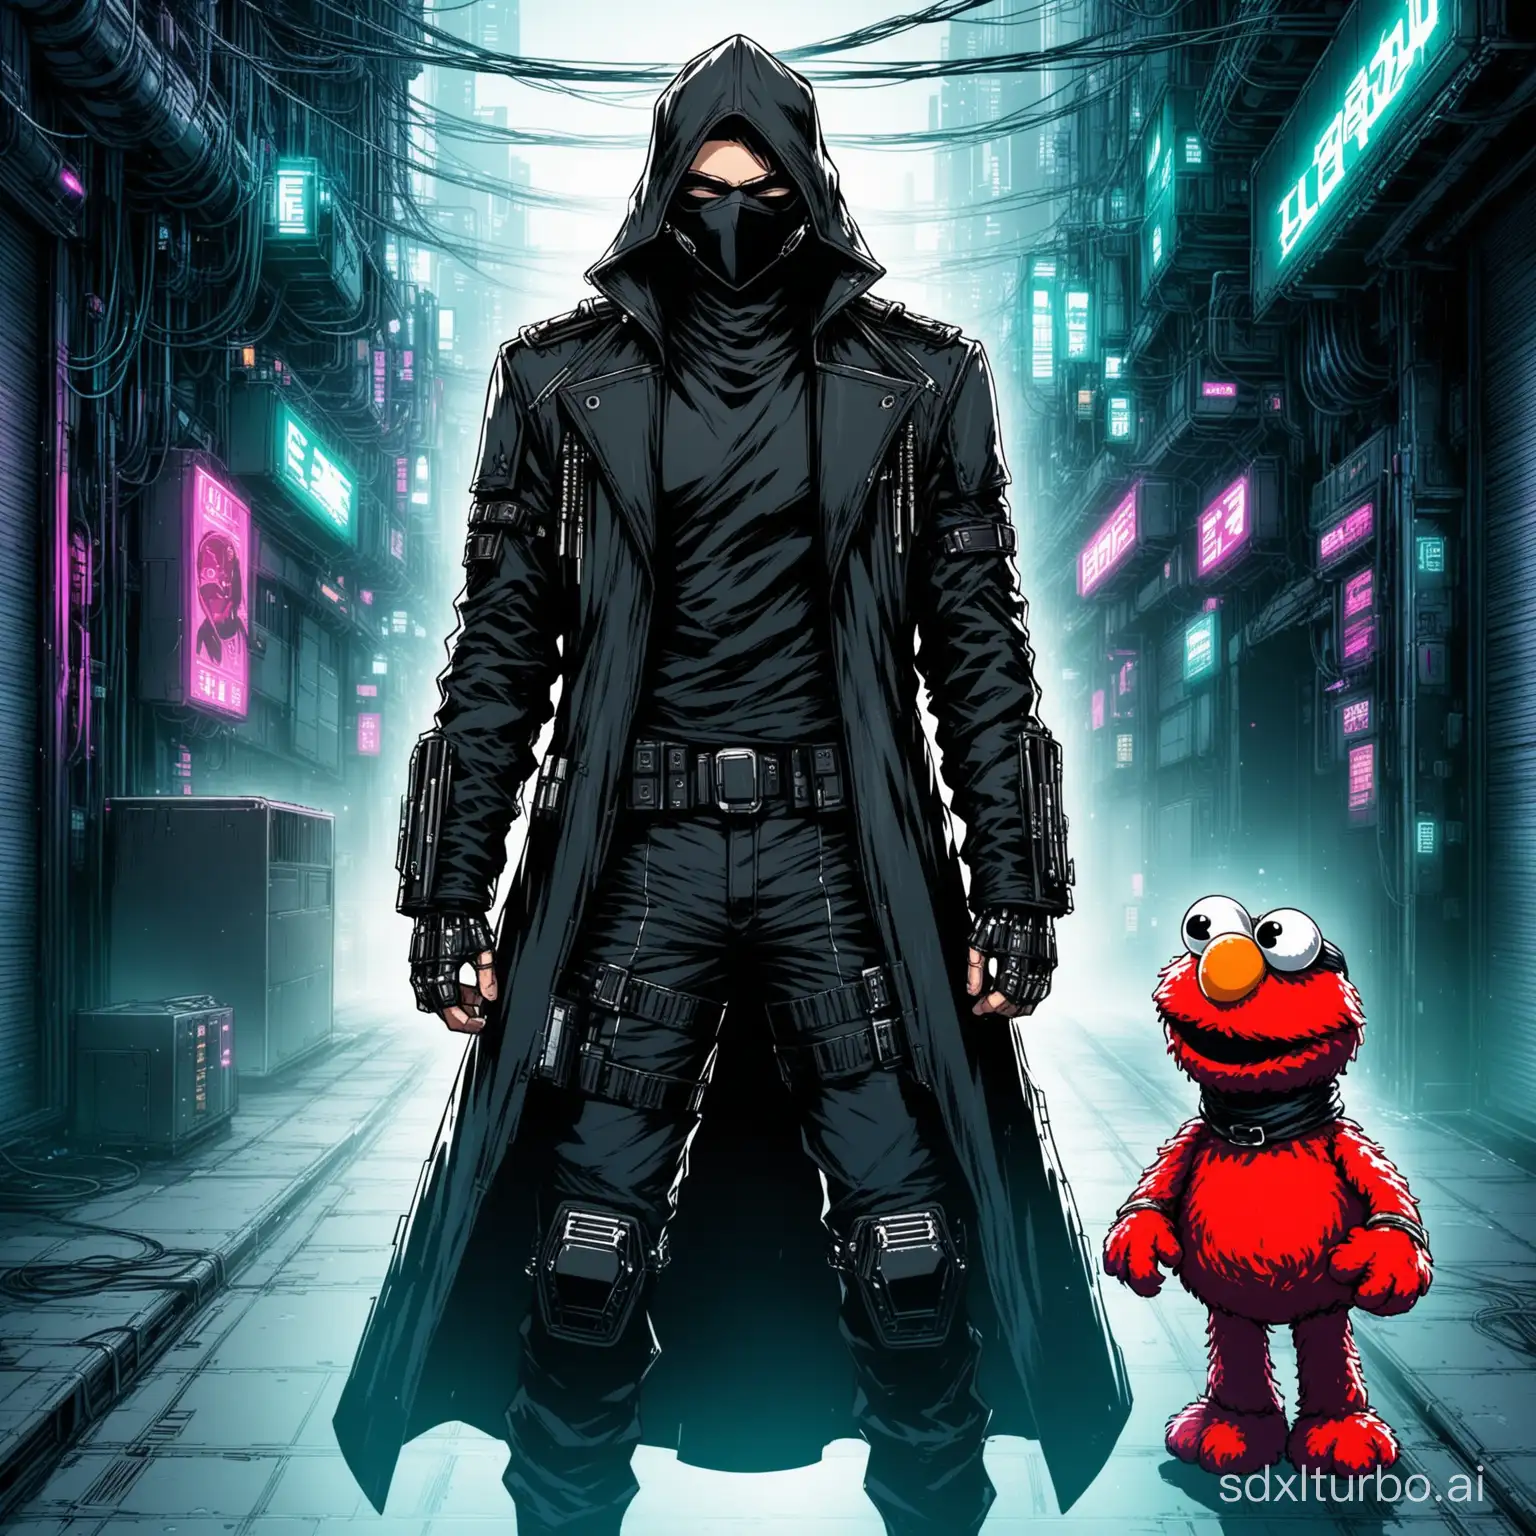 Cyberpunk Anime Masked man with elmo mask and el zorro clothes dressing style